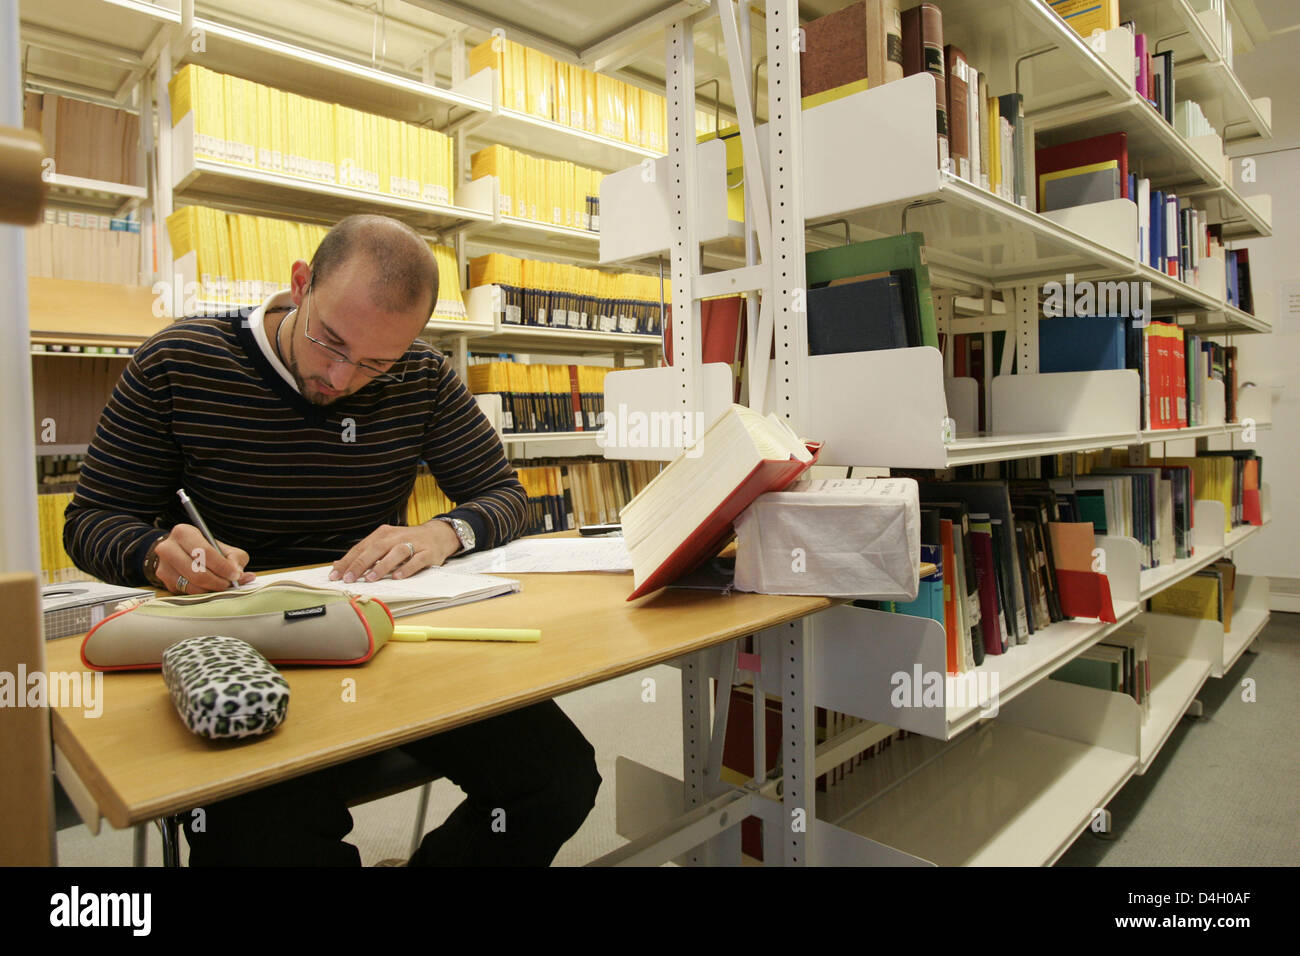 A student studies at 'Niedersaechsische Staats- und Universitaetsbibliothek' (literally: Lower Saxonian State and University Library'), 'Georg-August' University in Goettingen, Germany, 16 July 2008. Photo: Frank May Stock Photo